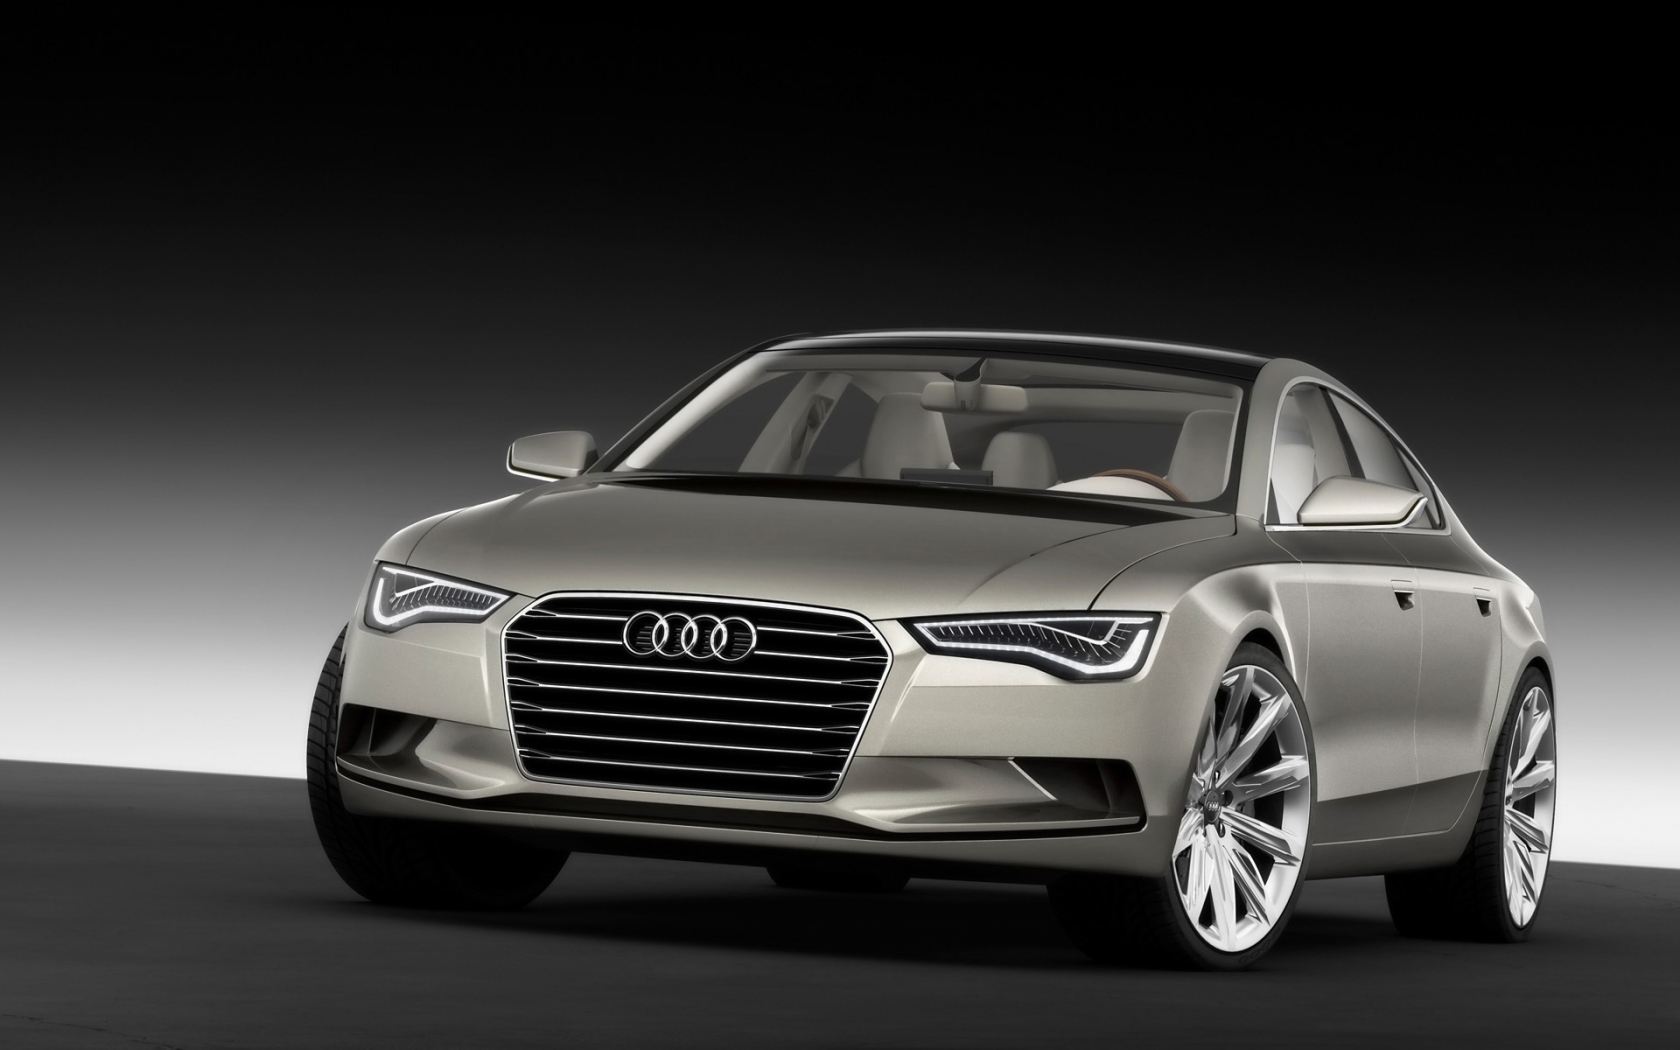 2009 Audi Sportback Concept - Front Angle for 1680 x 1050 widescreen resolution